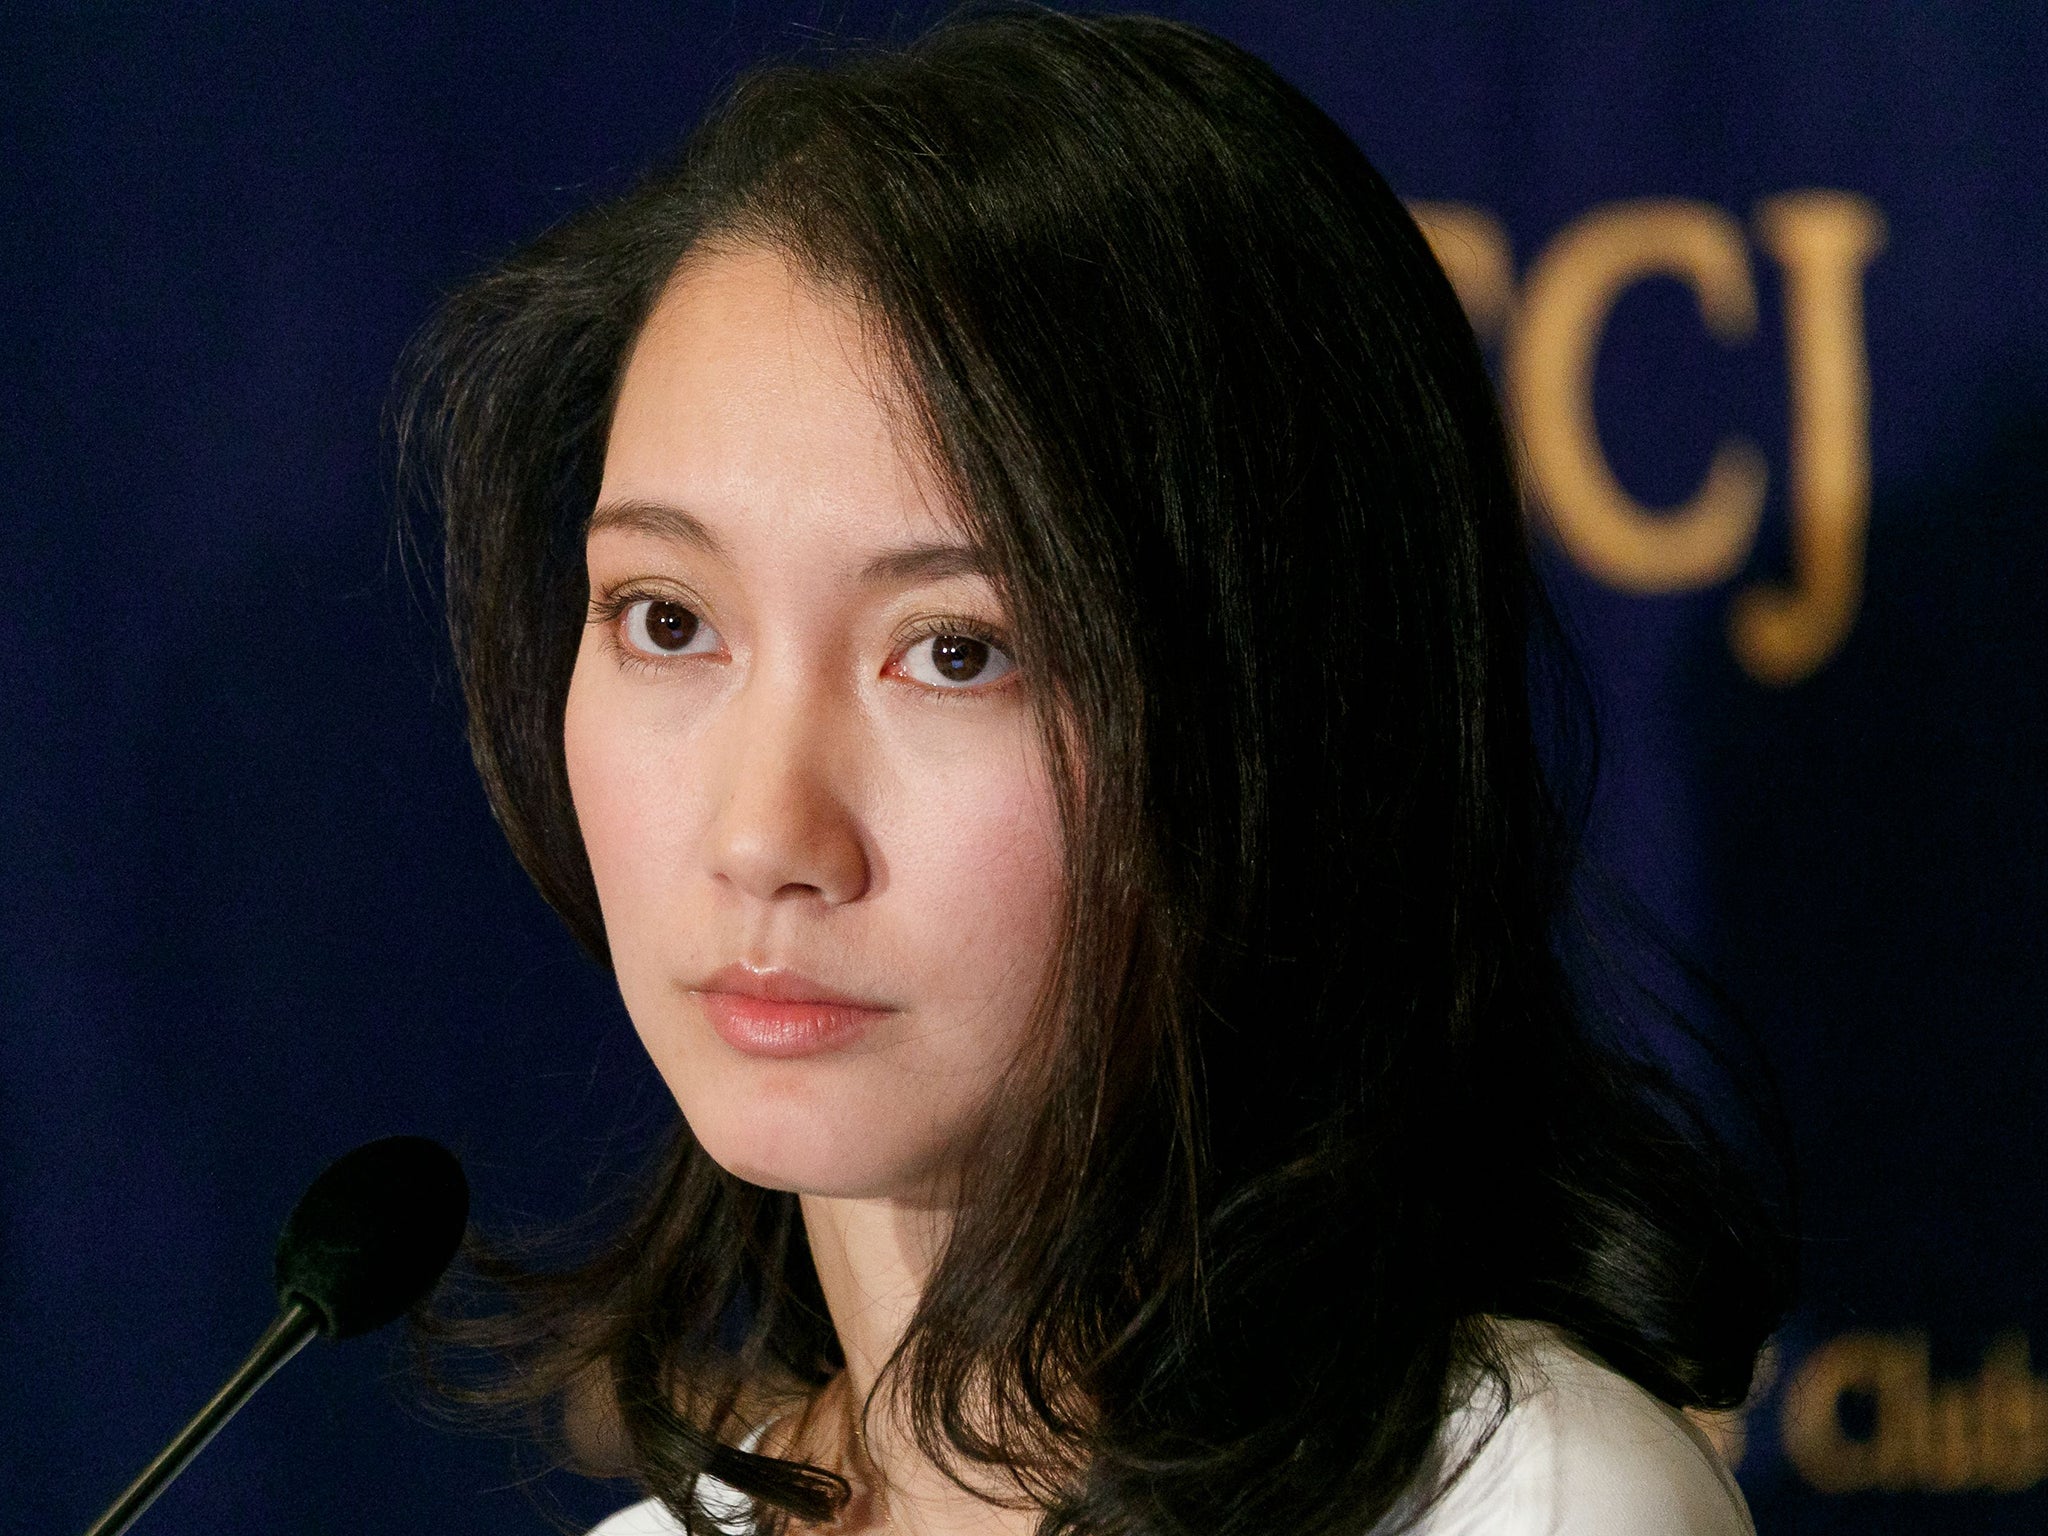 Japanese woman shatters culture of silence to pursue high-profile TV journalist accused of raping her The Independent The Independent